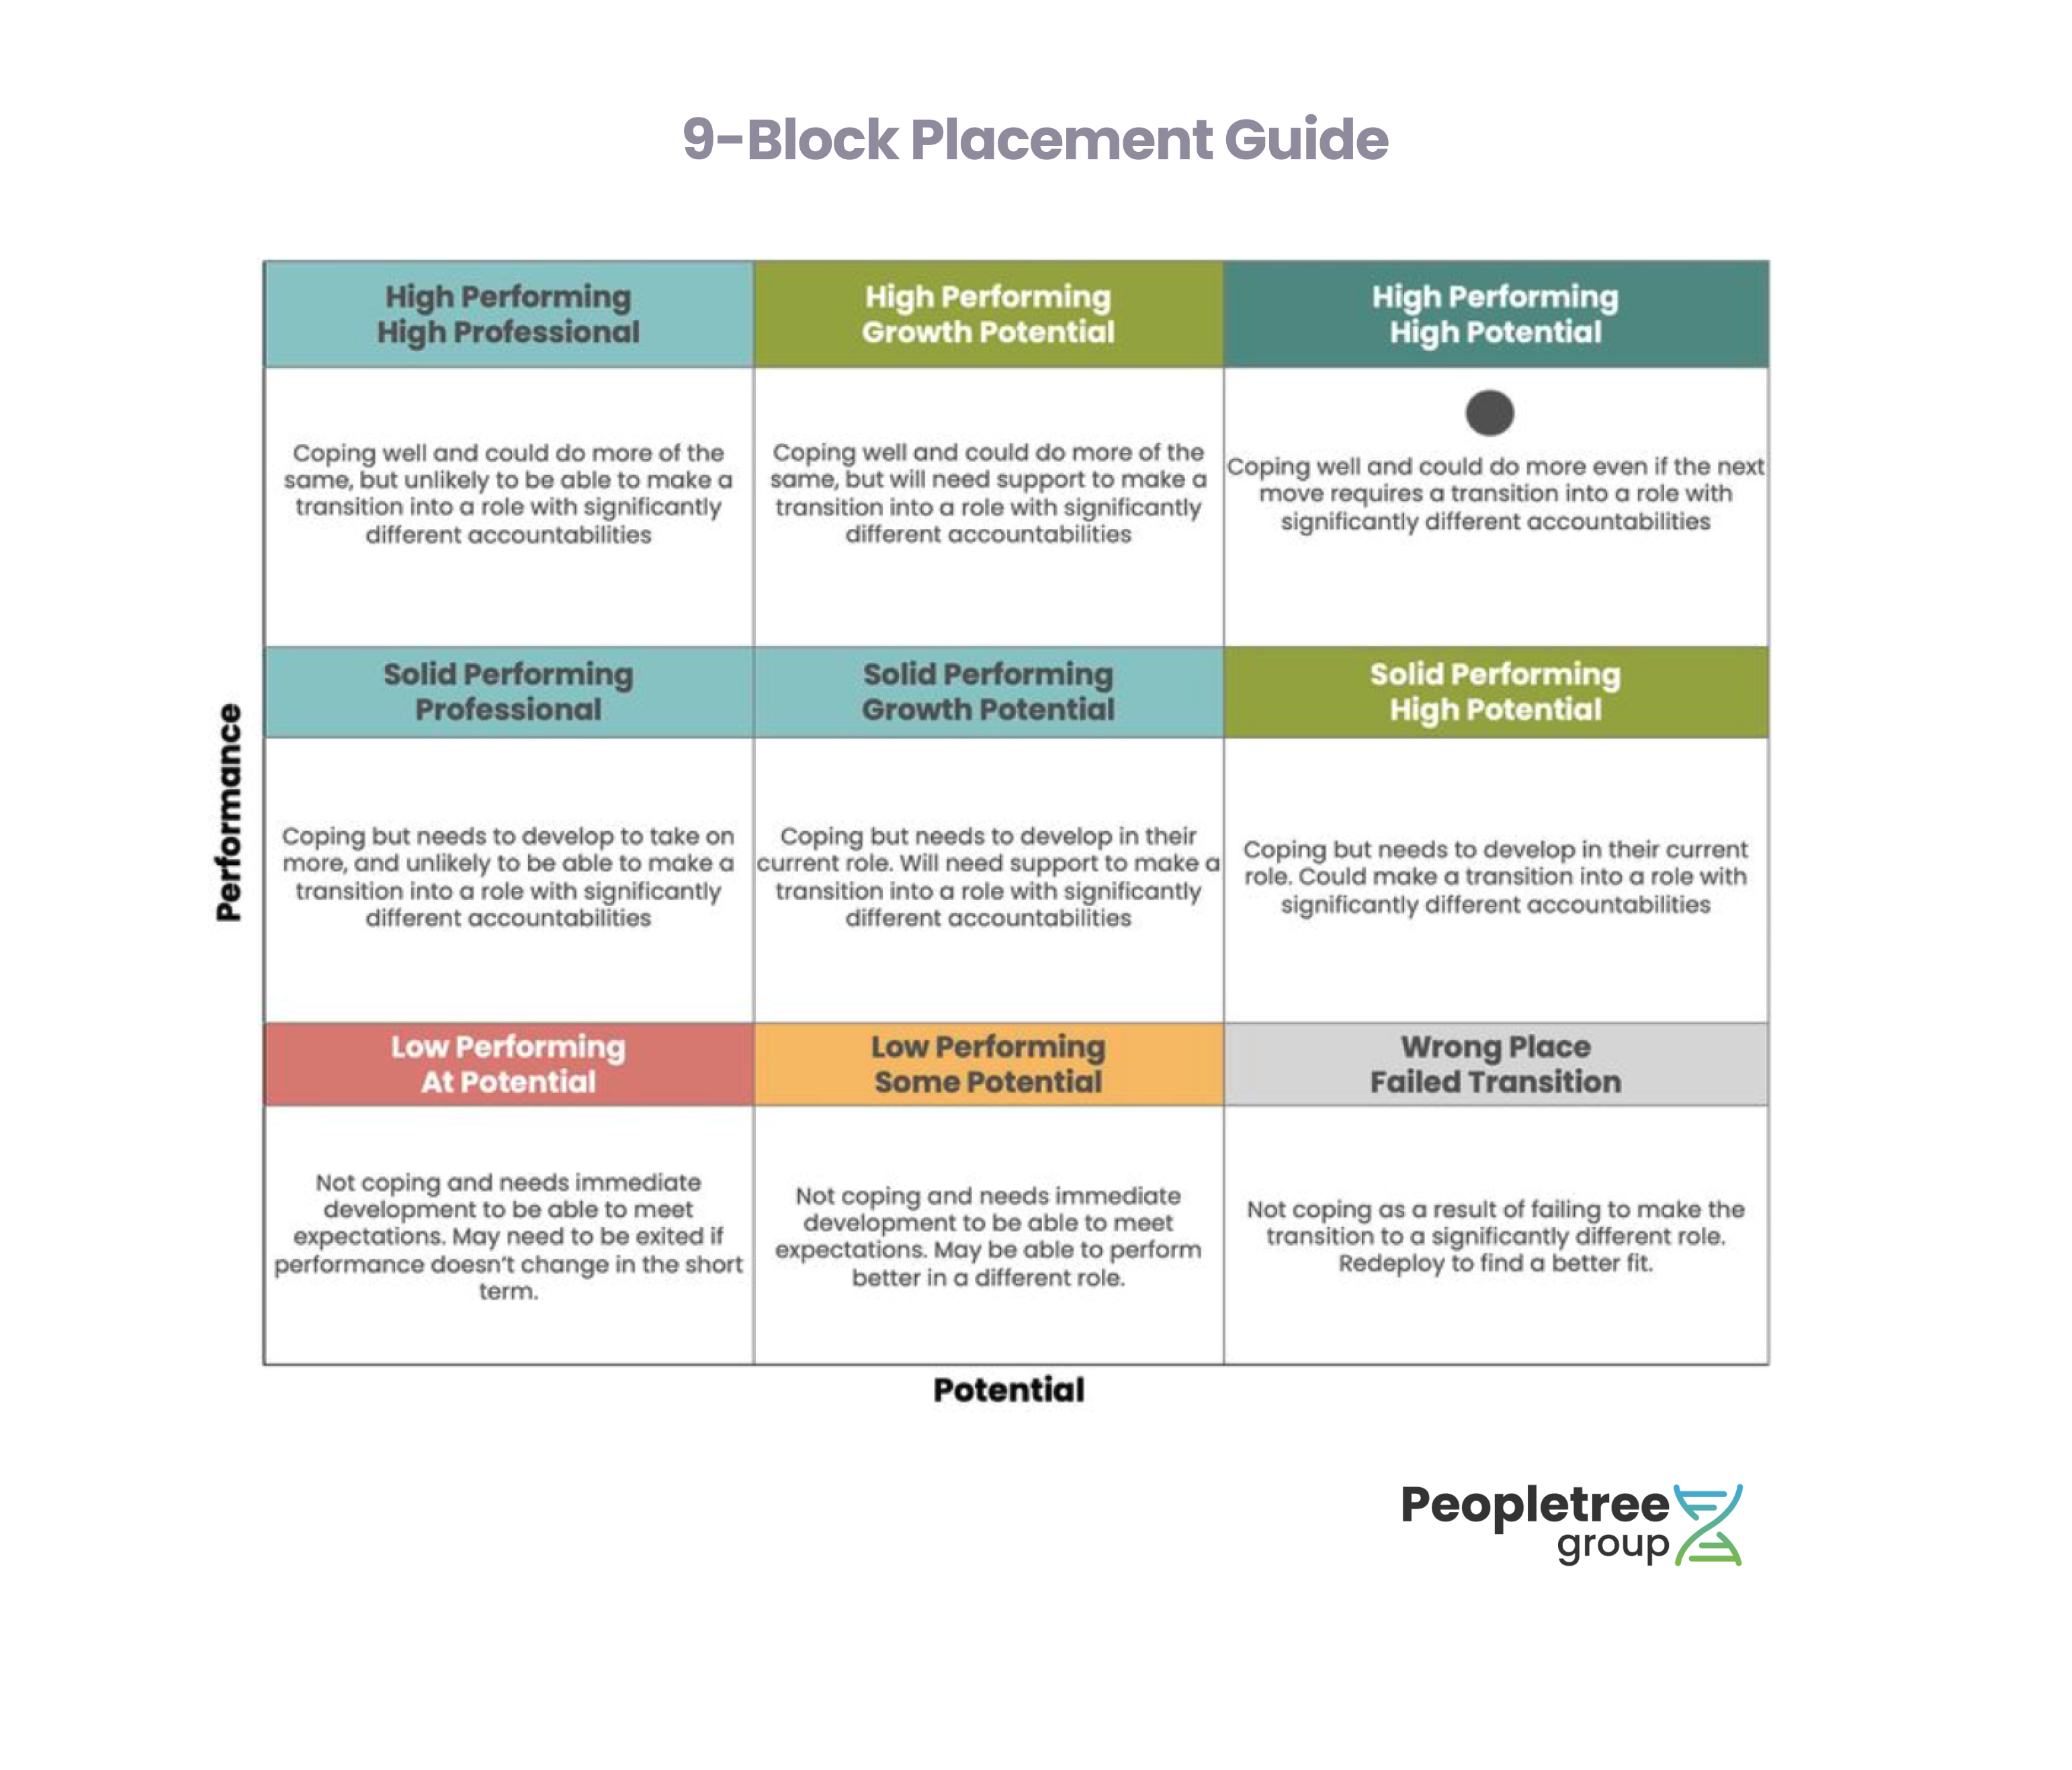 Example of a typical 9-block placement guide for talent reviews